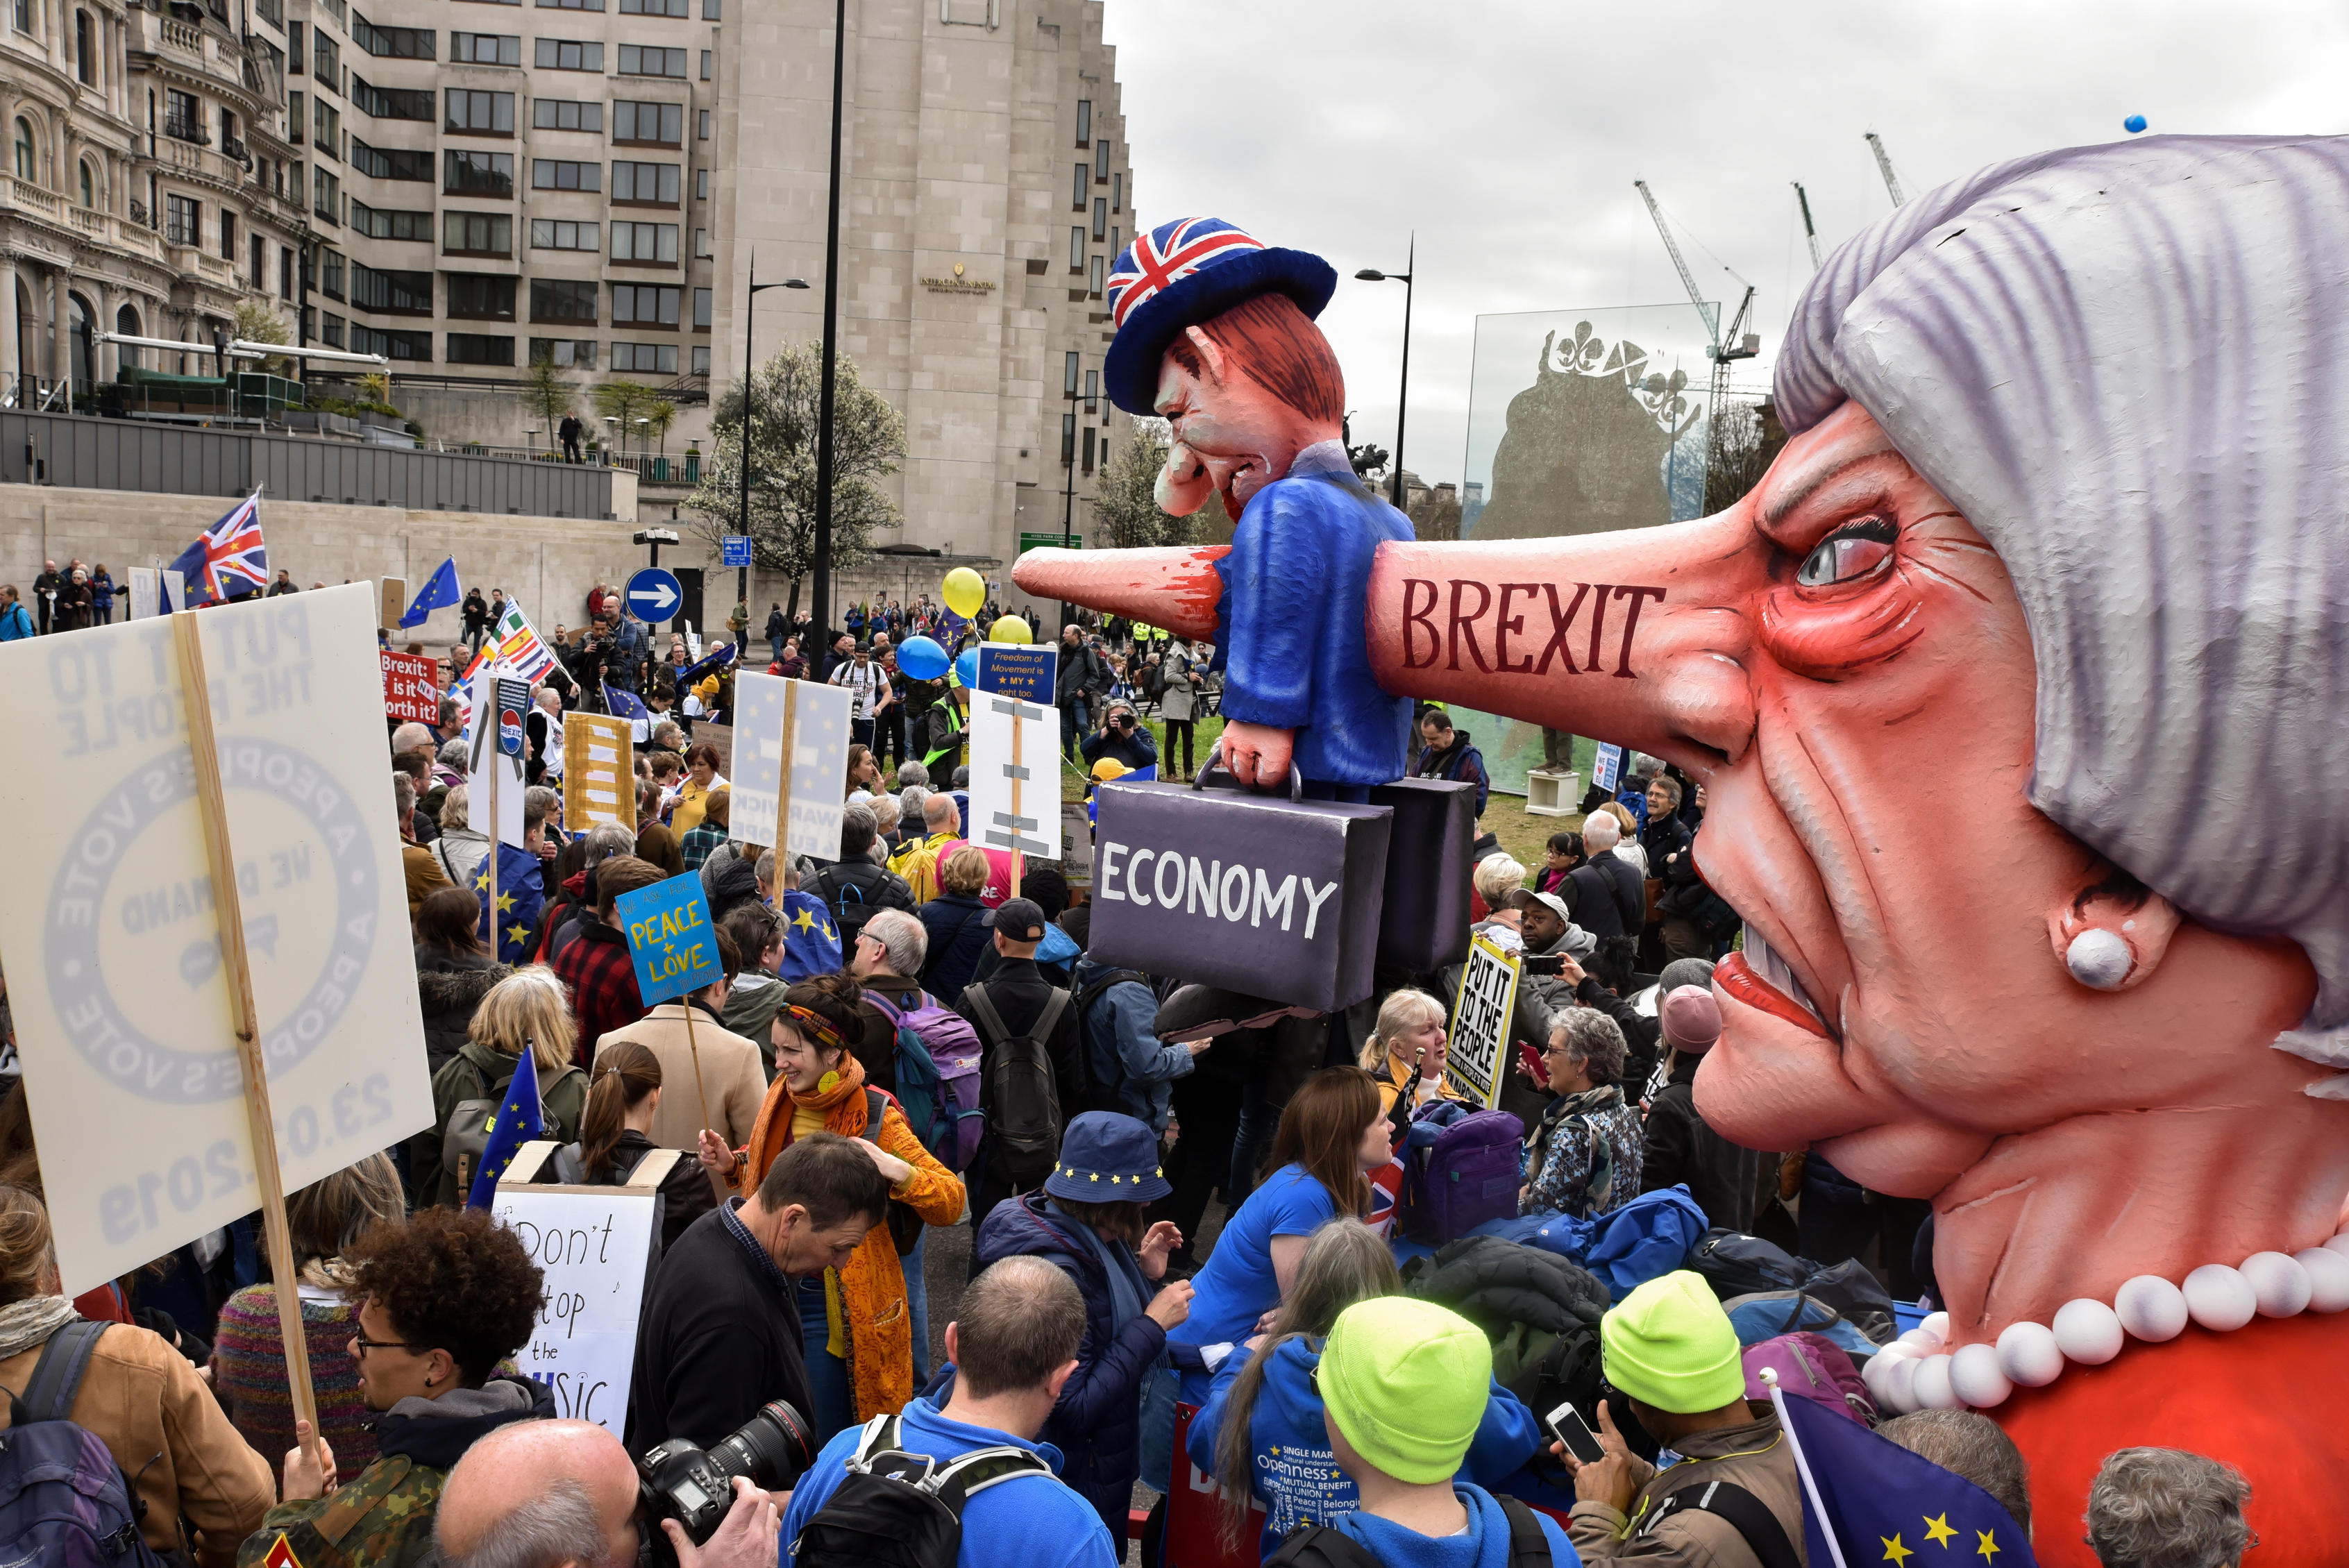 Tens of thousands of people march to demand a People's Vote and a second referendum vote on Brexit